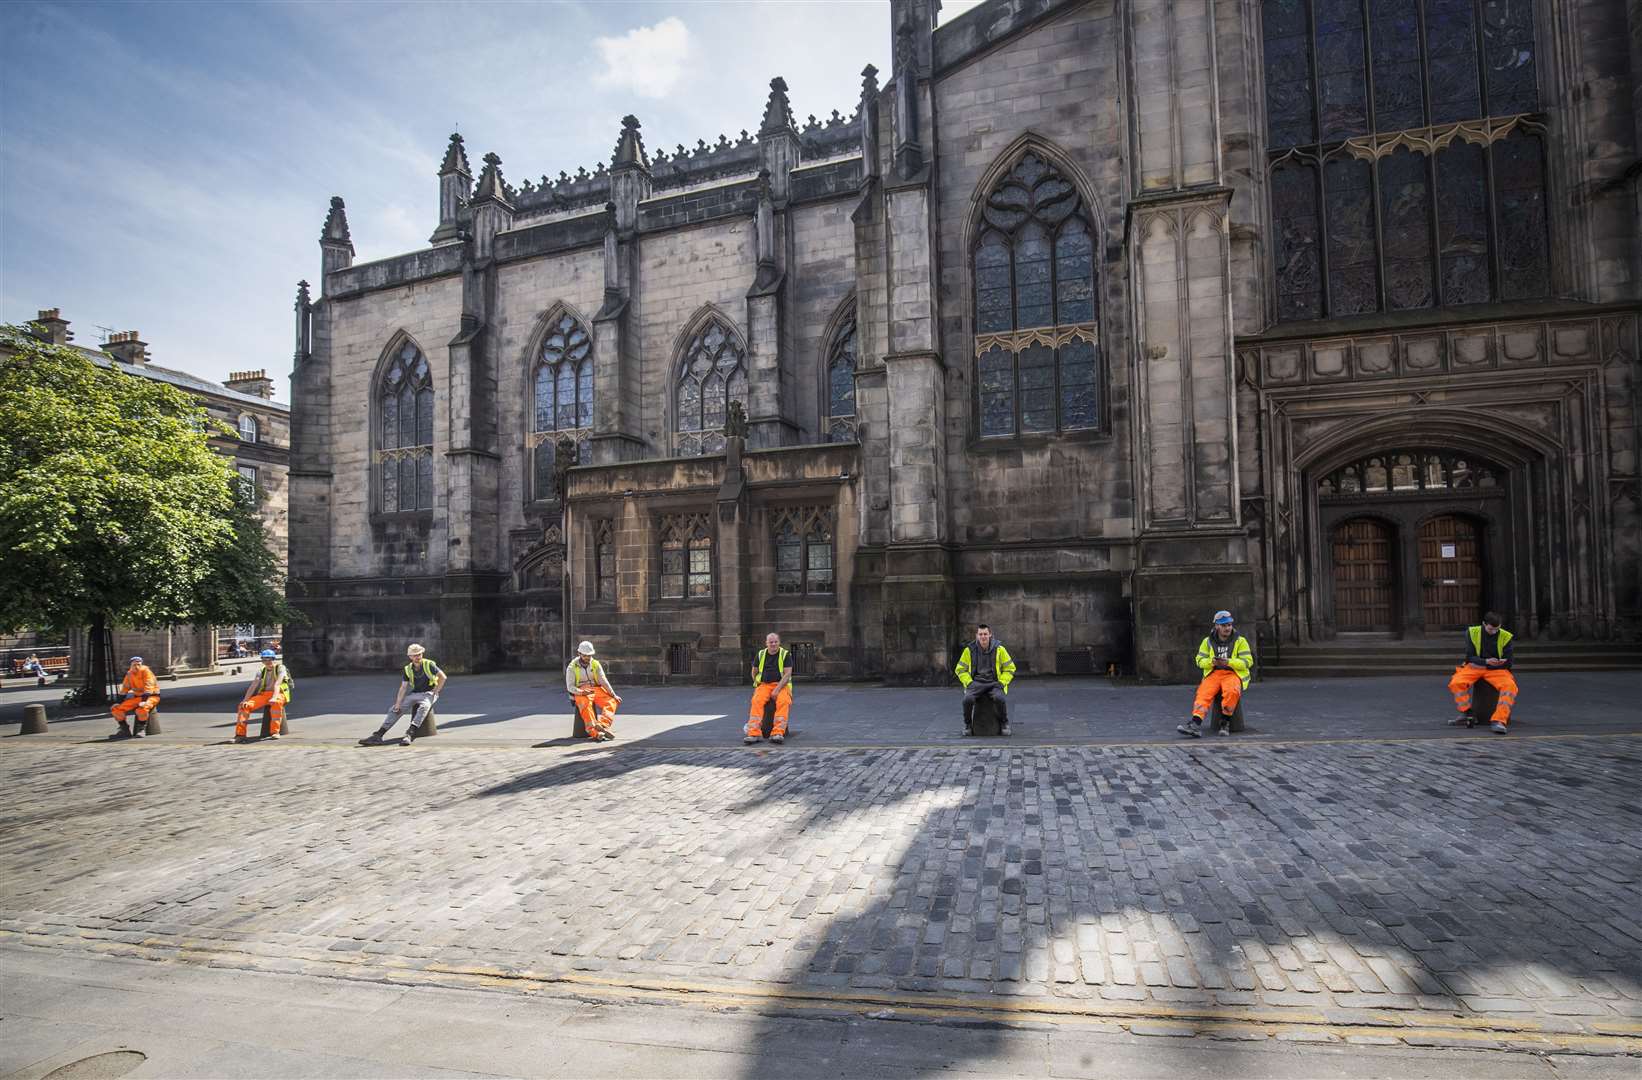 Construction workers comply with social distancing during their break along Edinburgh’s Royal Mile (Jane Barlow/PA)